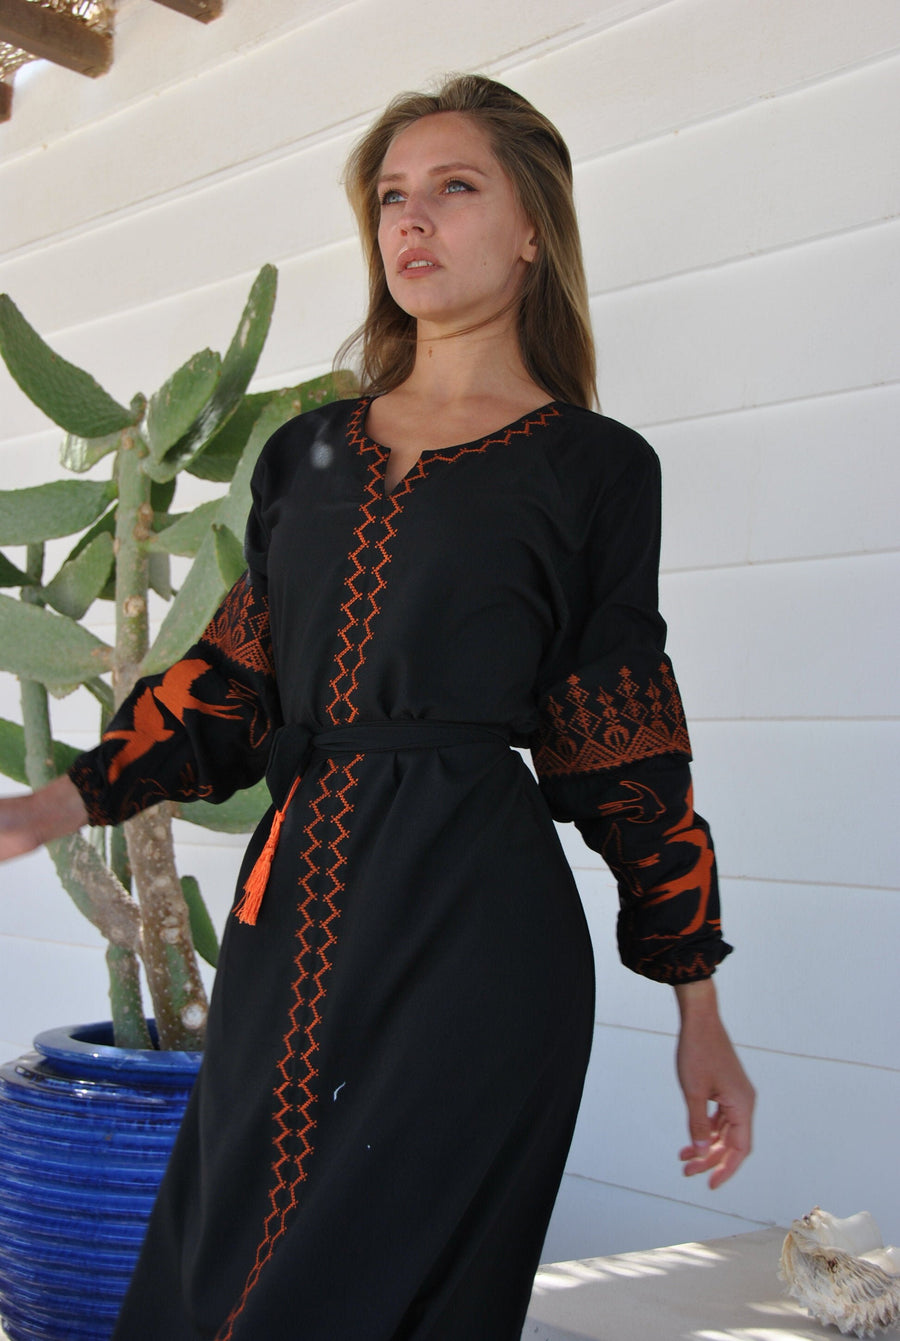 Black Cotton Caftan with belt, Orange embroidery, caftans for women, embroidered Caftan dress, Caftan maxi dress, Caftans for women, Caftans